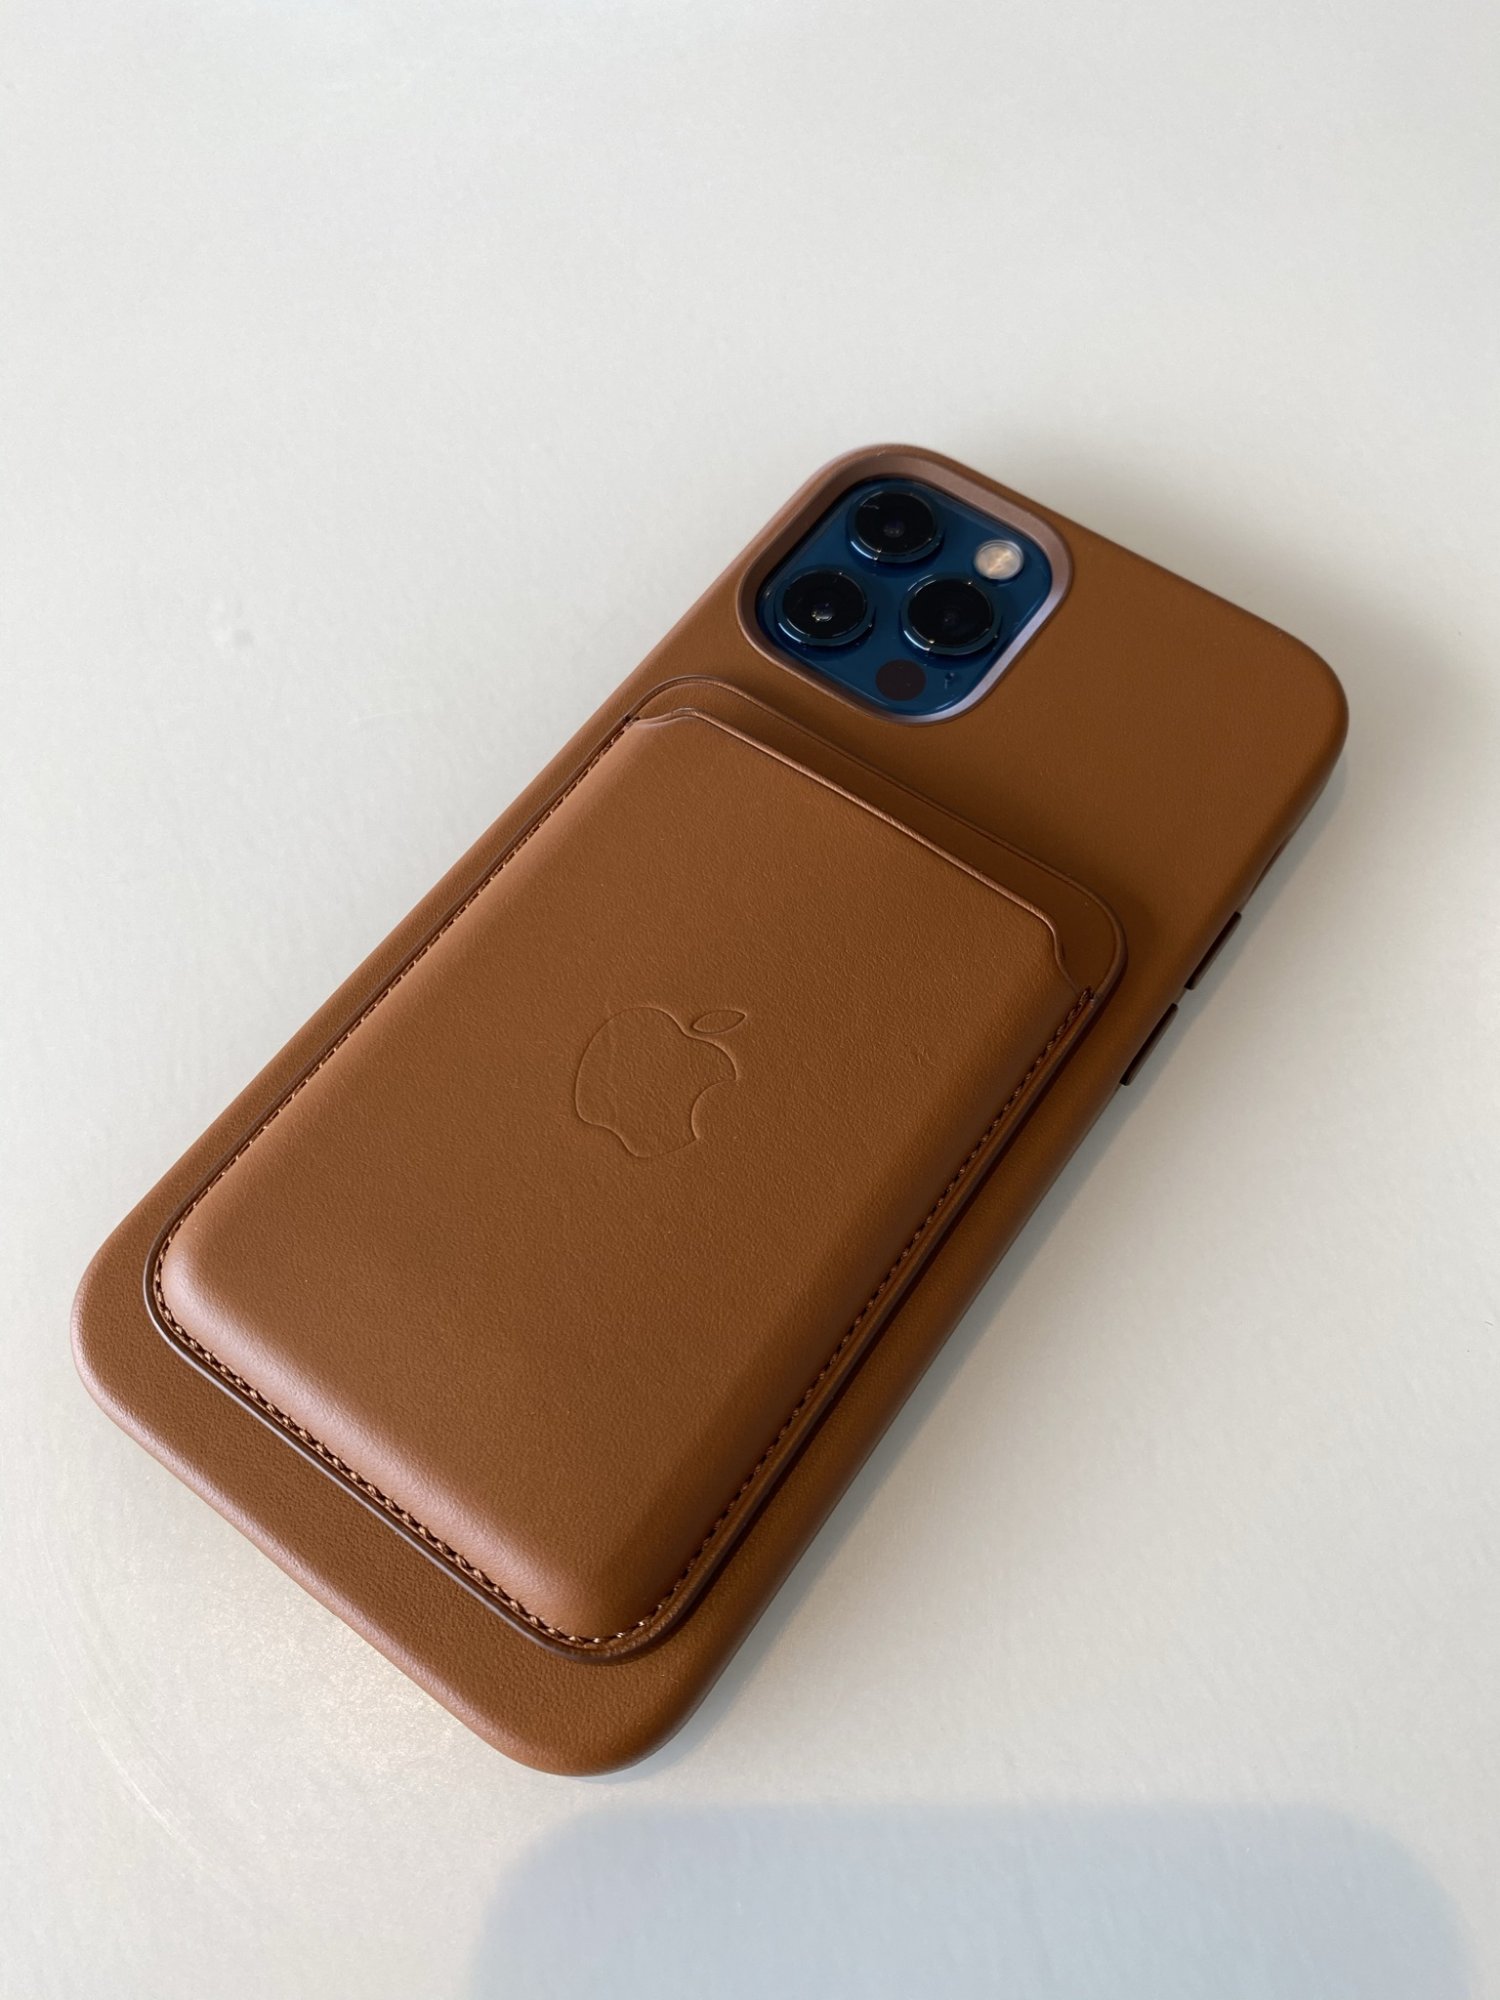 iPhone 12 leather case and leather wallet combination thread